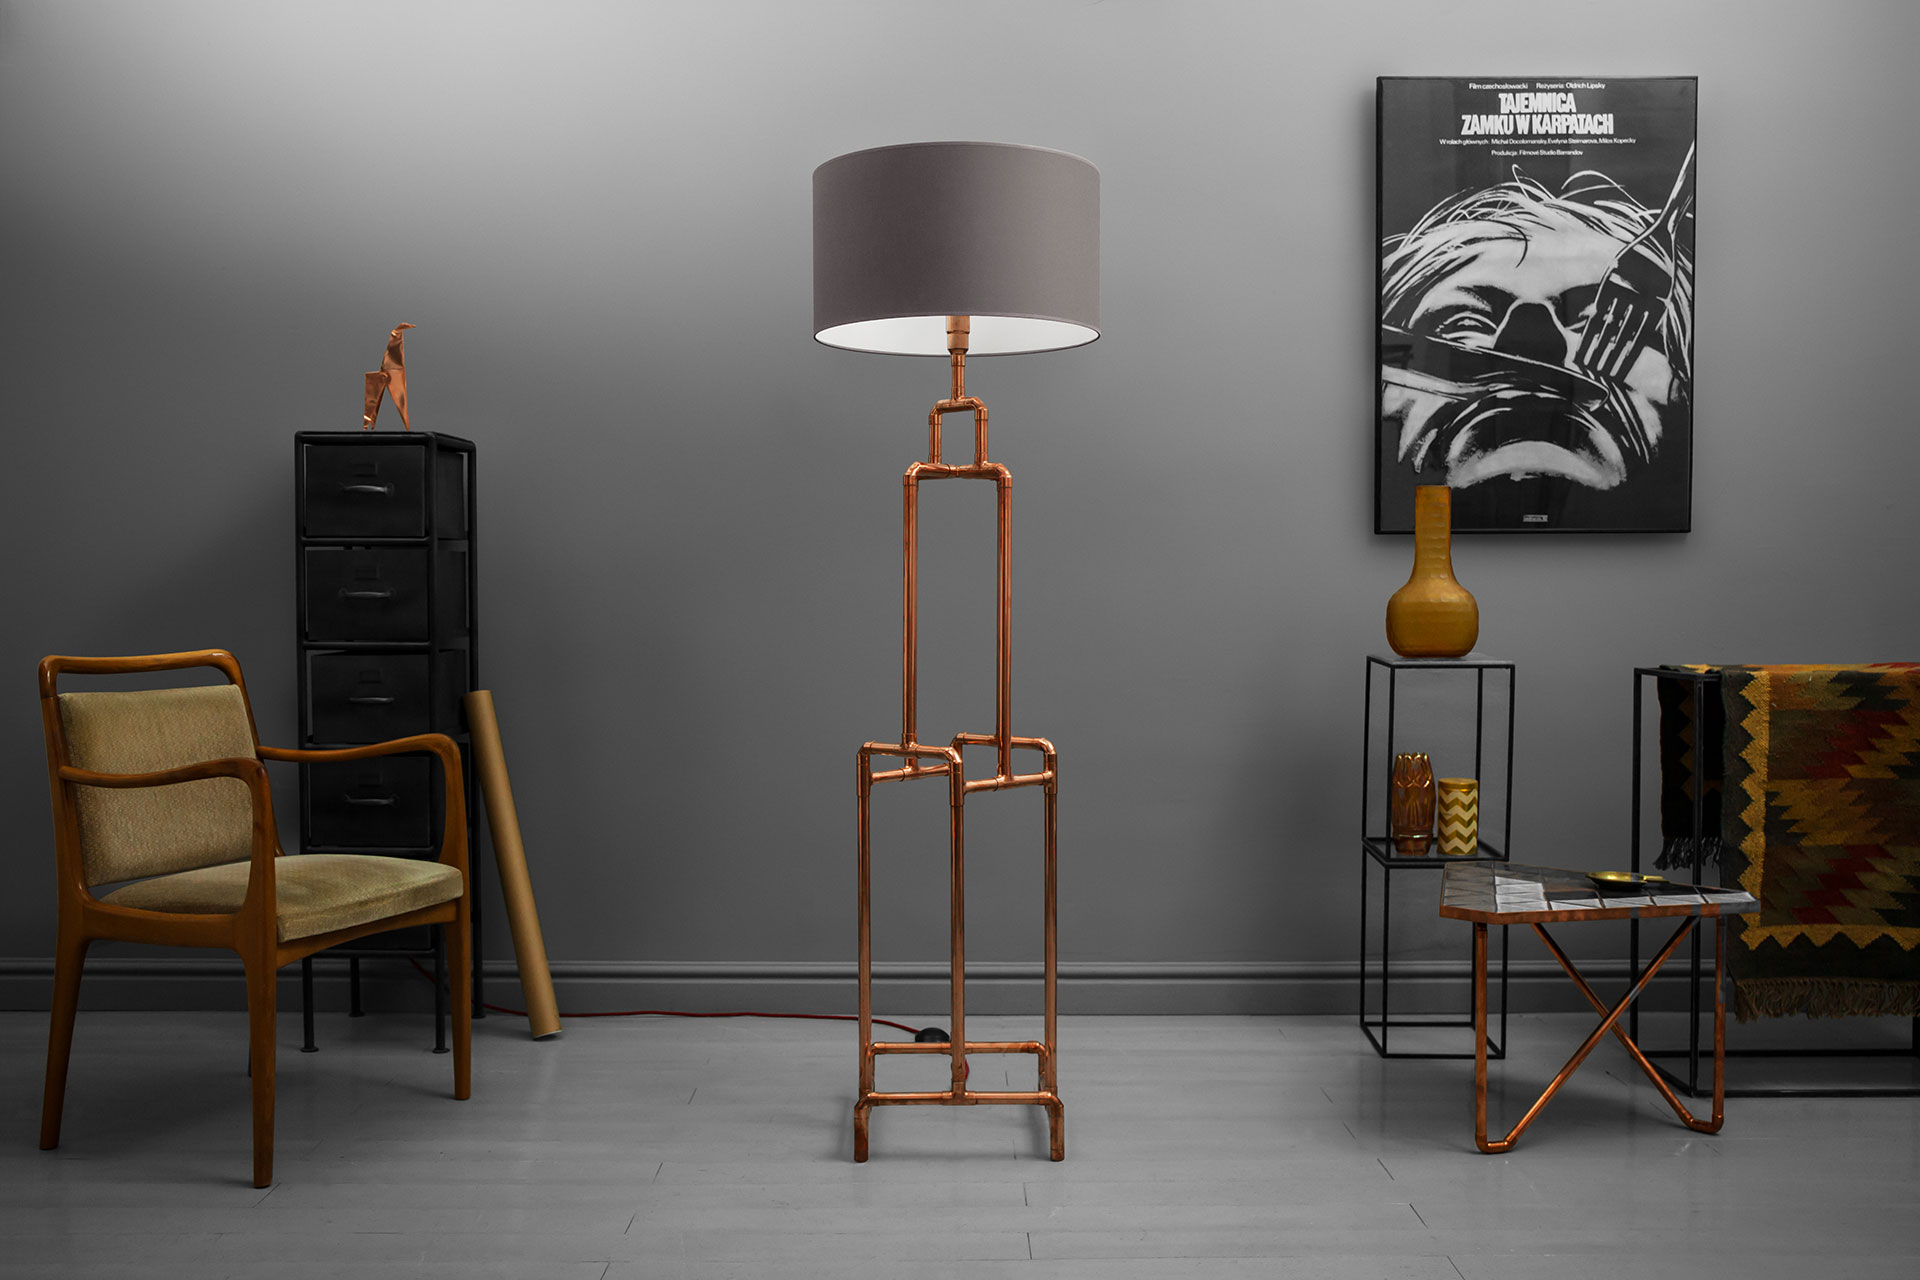 Loft style floor lamp made of copper pipes in trendy hipster apartment